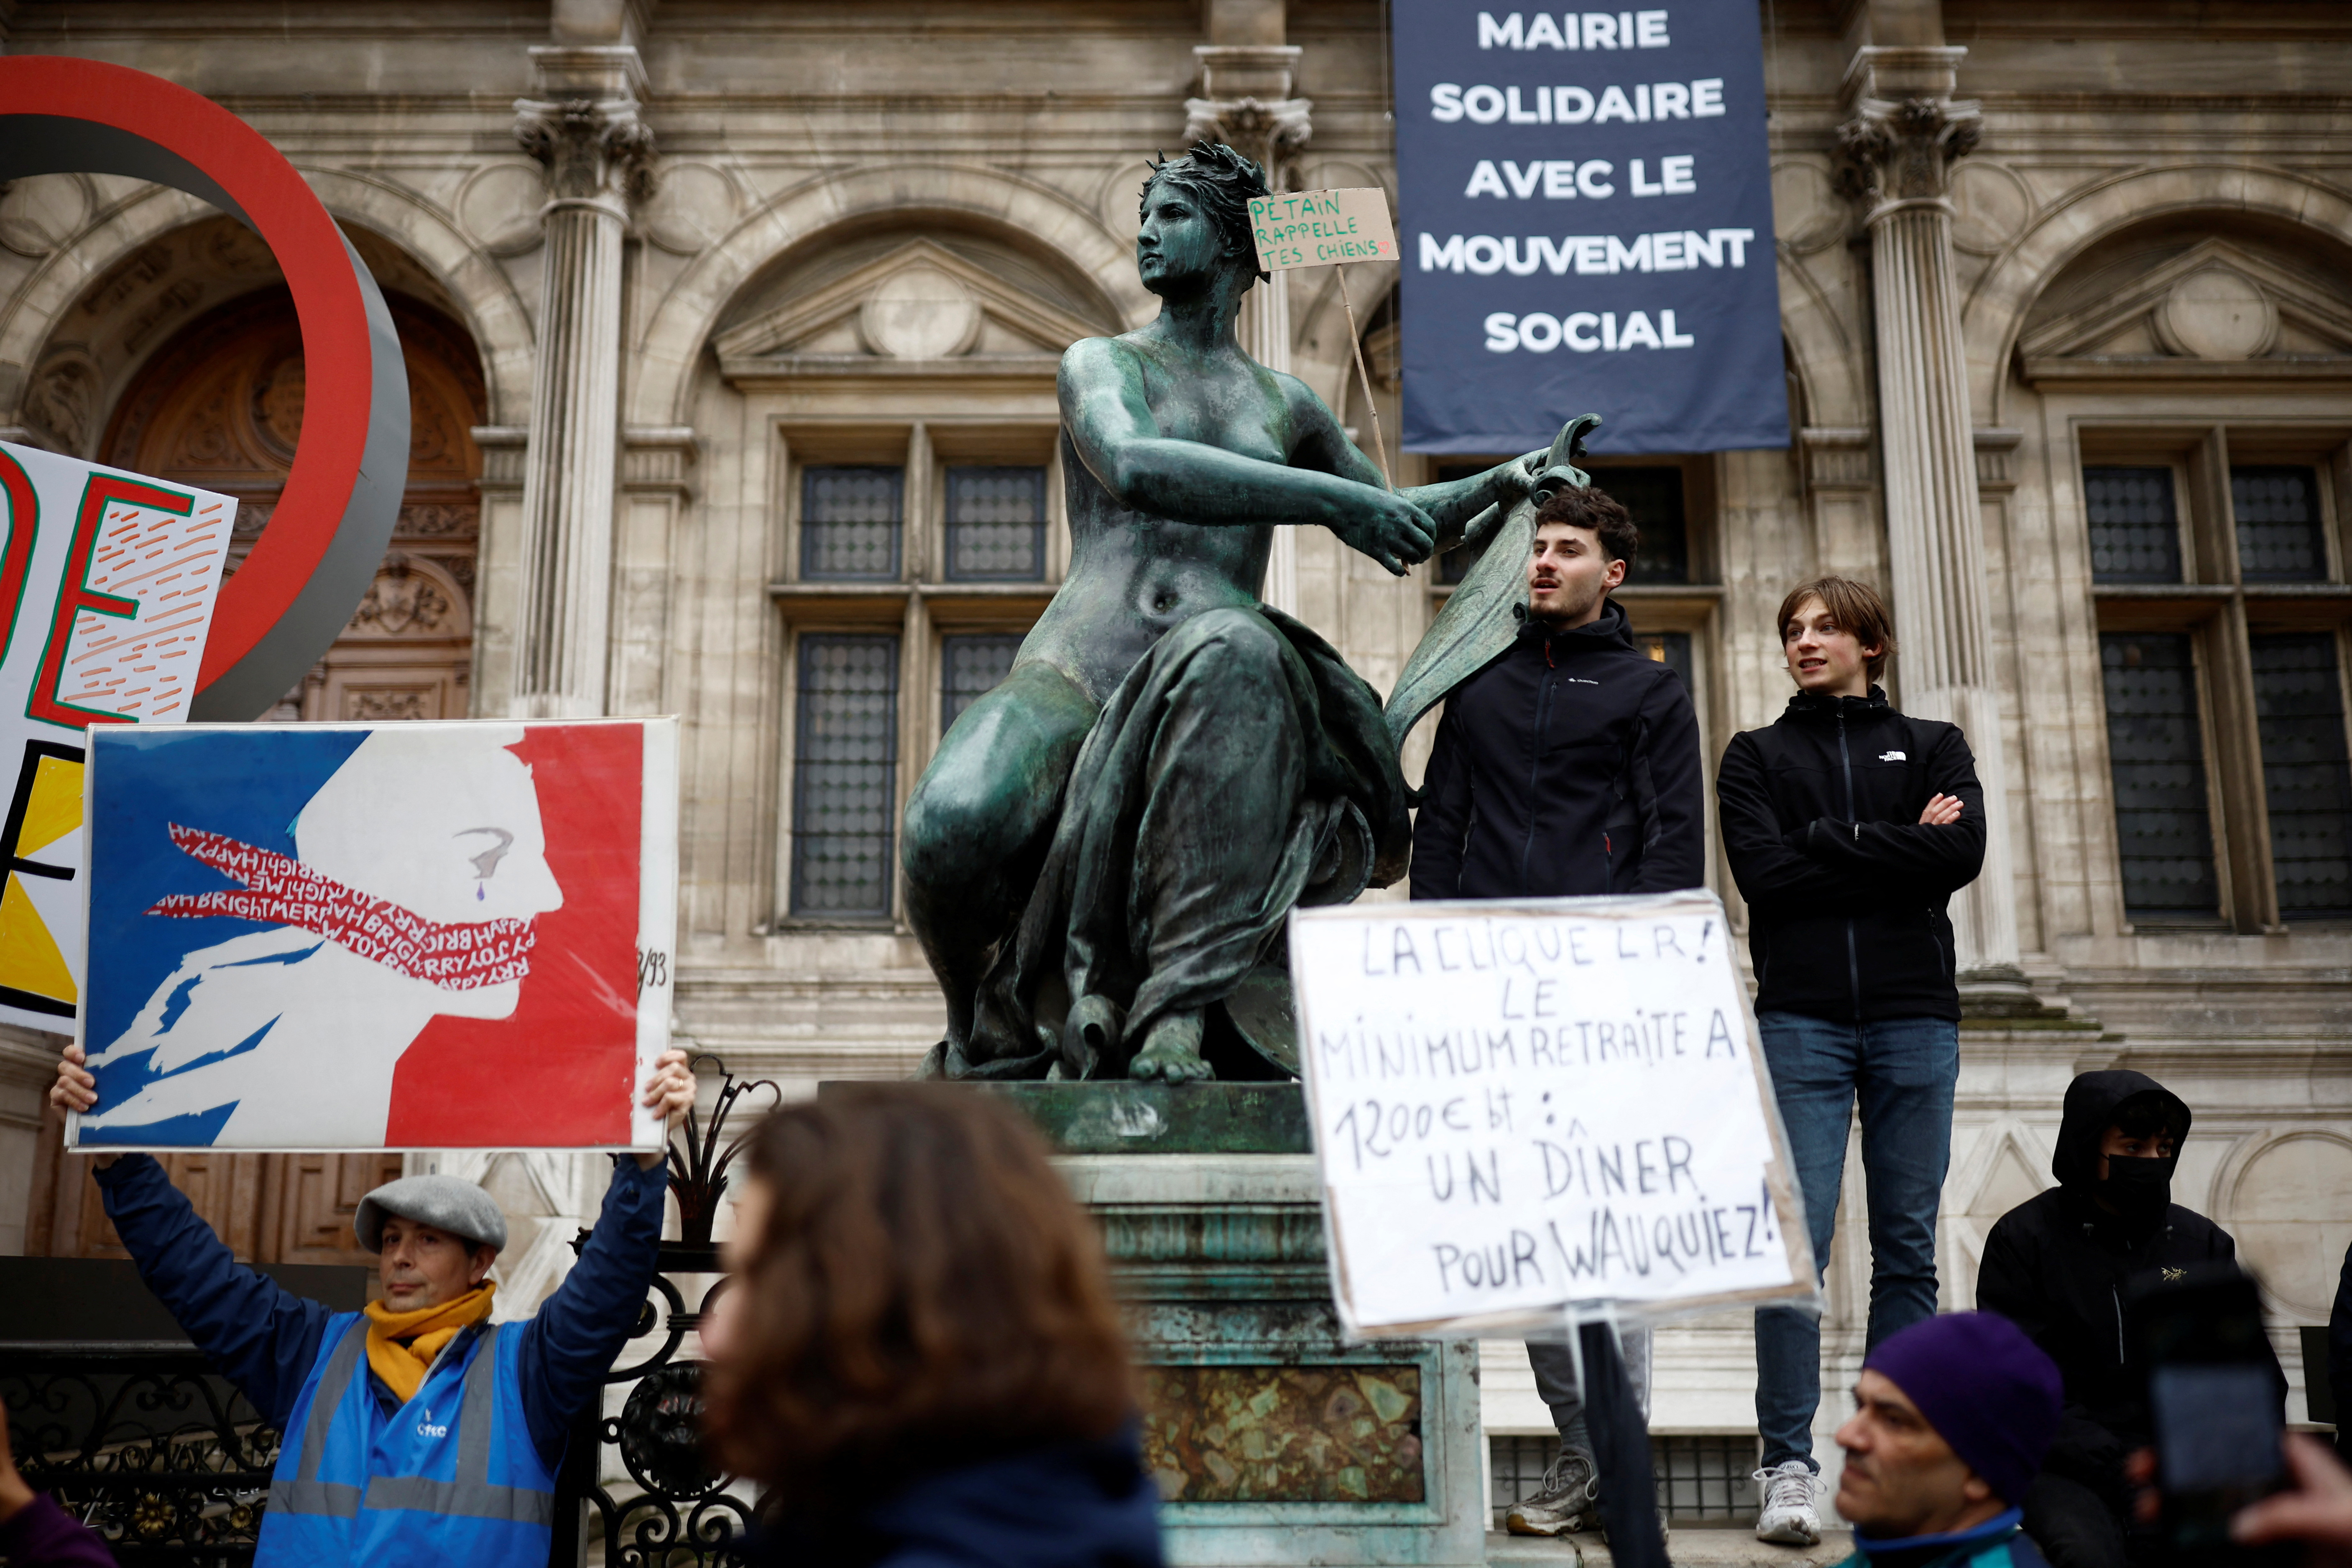 People attend a protest after Constitutional Council decision on pension reform in Paris